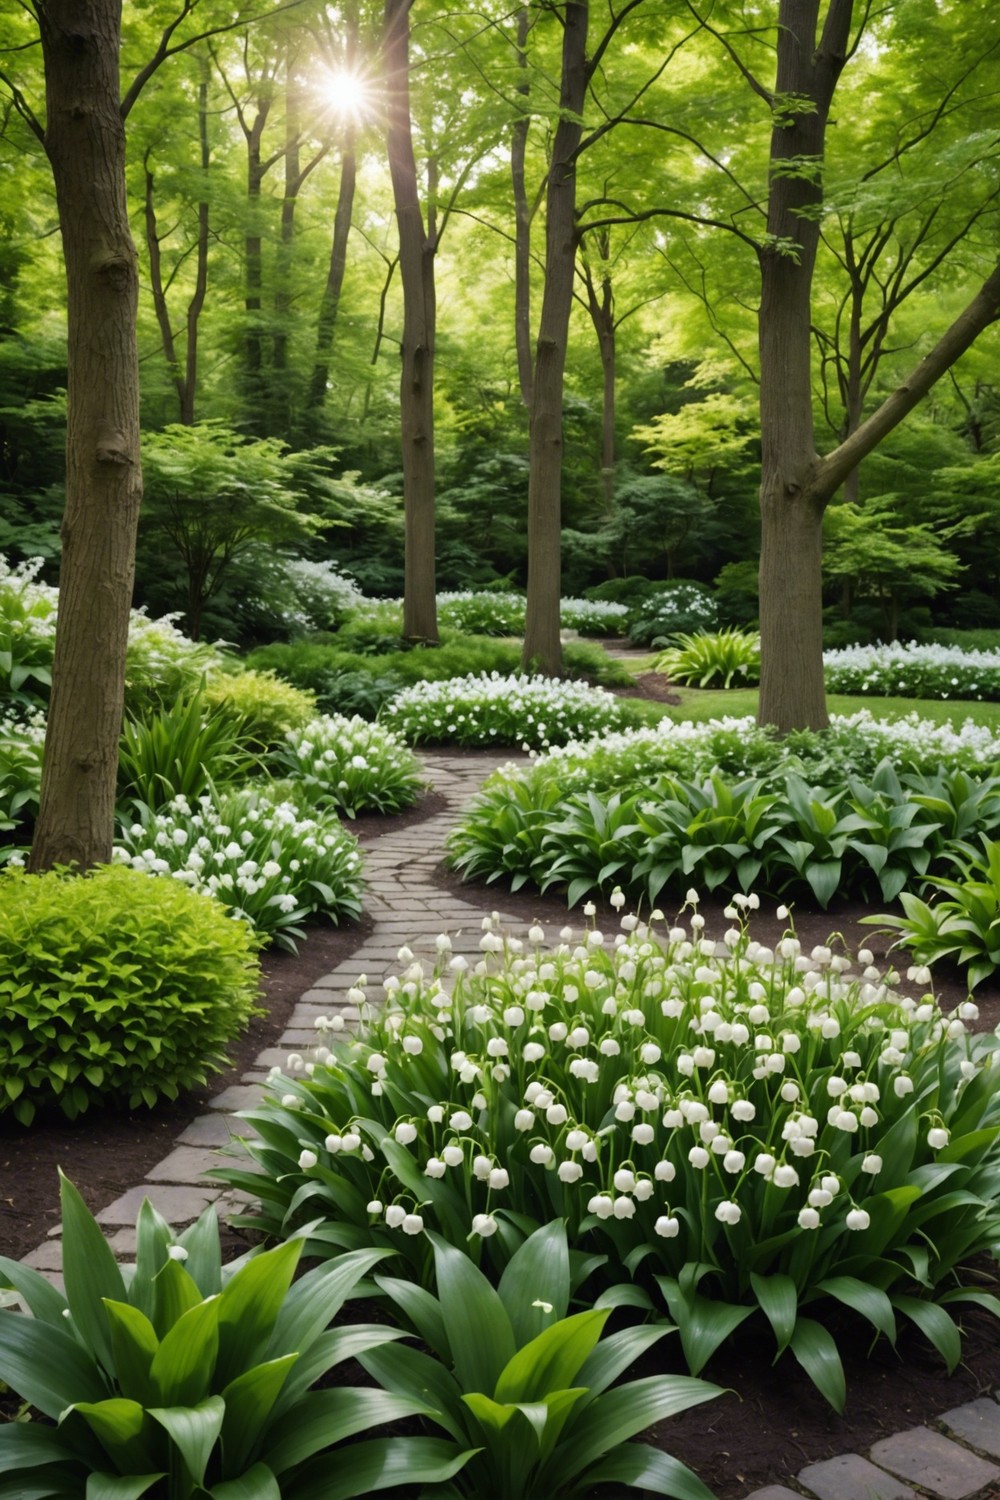 Plant Lily of the Valley in a Shade Garden for a Low-Maintenance Option